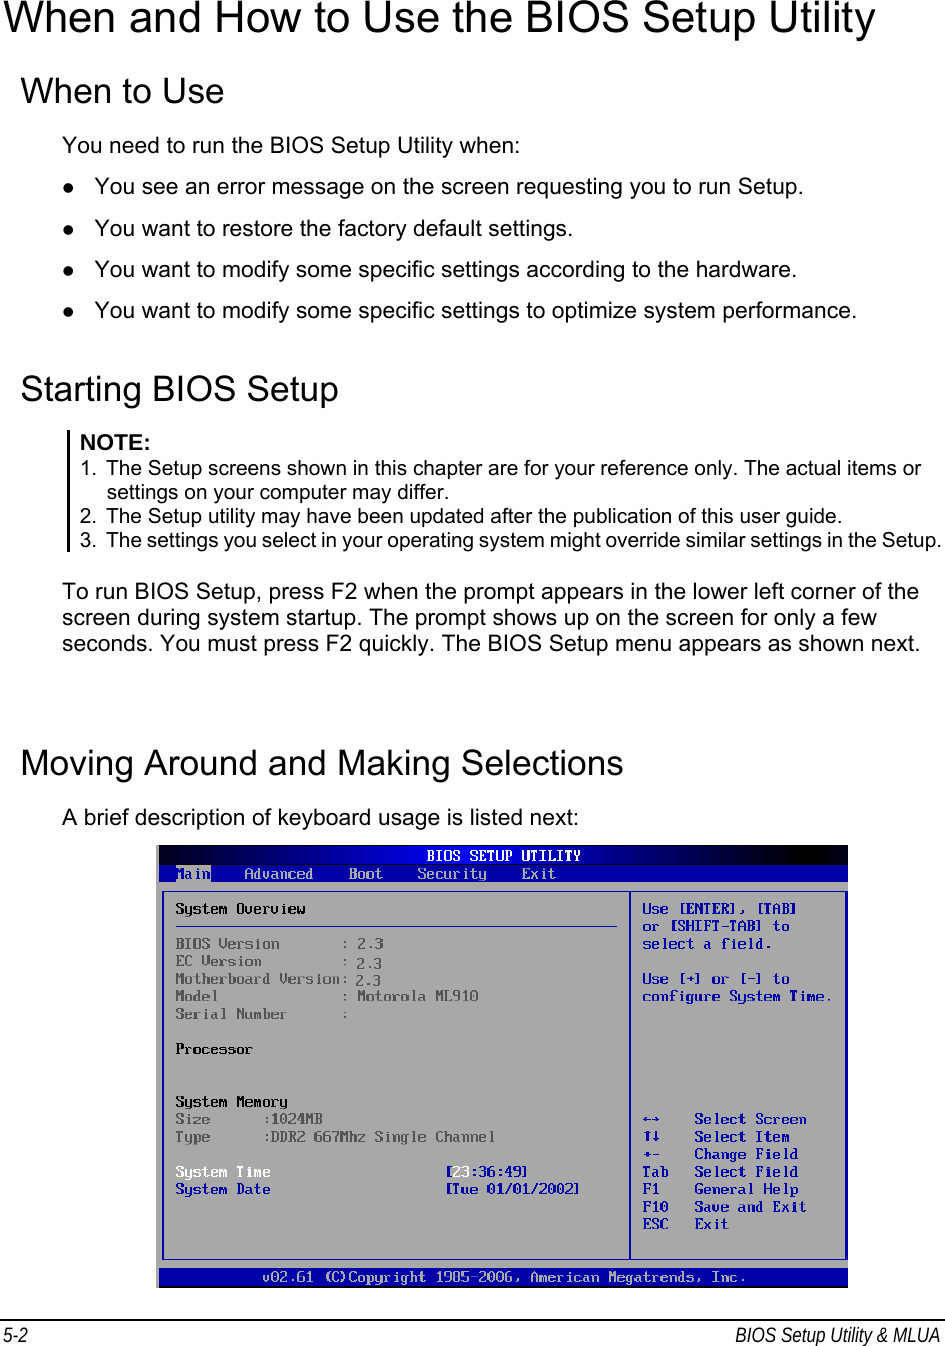 5-2  BIOS Setup Utility &amp; MLUA                                         When and How to Use the BIOS Setup Utility When to Use You need to run the BIOS Setup Utility when: z You see an error message on the screen requesting you to run Setup. z You want to restore the factory default settings. z You want to modify some specific settings according to the hardware. z You want to modify some specific settings to optimize system performance. Starting BIOS Setup NOTE: 1.  The Setup screens shown in this chapter are for your reference only. The actual items or settings on your computer may differ. 2.  The Setup utility may have been updated after the publication of this user guide. 3.  The settings you select in your operating system might override similar settings in the Setup.  To run BIOS Setup, press F2 when the prompt appears in the lower left corner of the screen during system startup. The prompt shows up on the screen for only a few seconds. You must press F2 quickly. The BIOS Setup menu appears as shown next.  Moving Around and Making Selections A brief description of keyboard usage is listed next:  